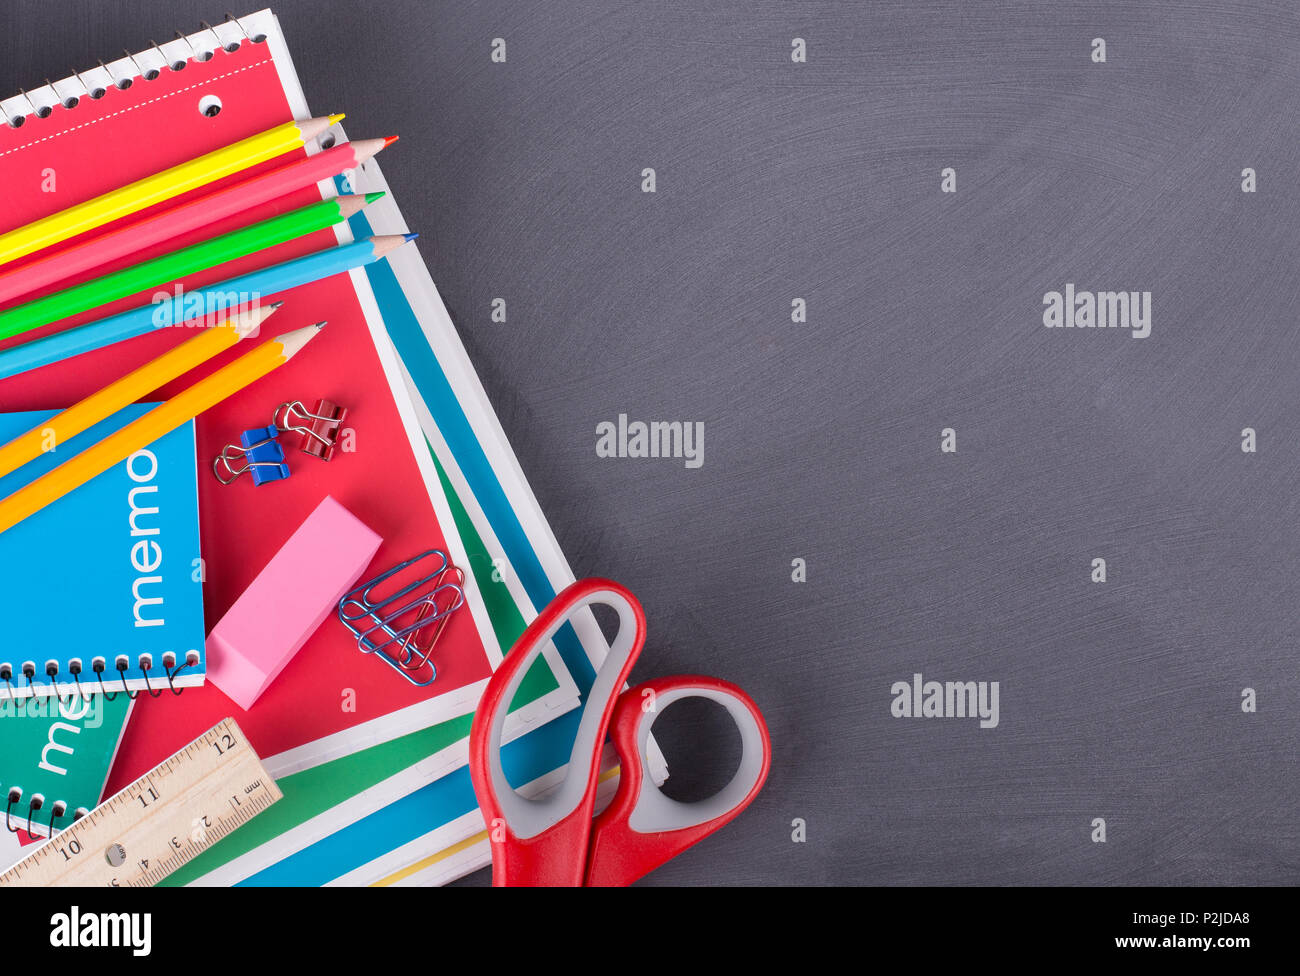 Overhead view of an assortment of school supplies on a blackboard background with copy space Stock Photo